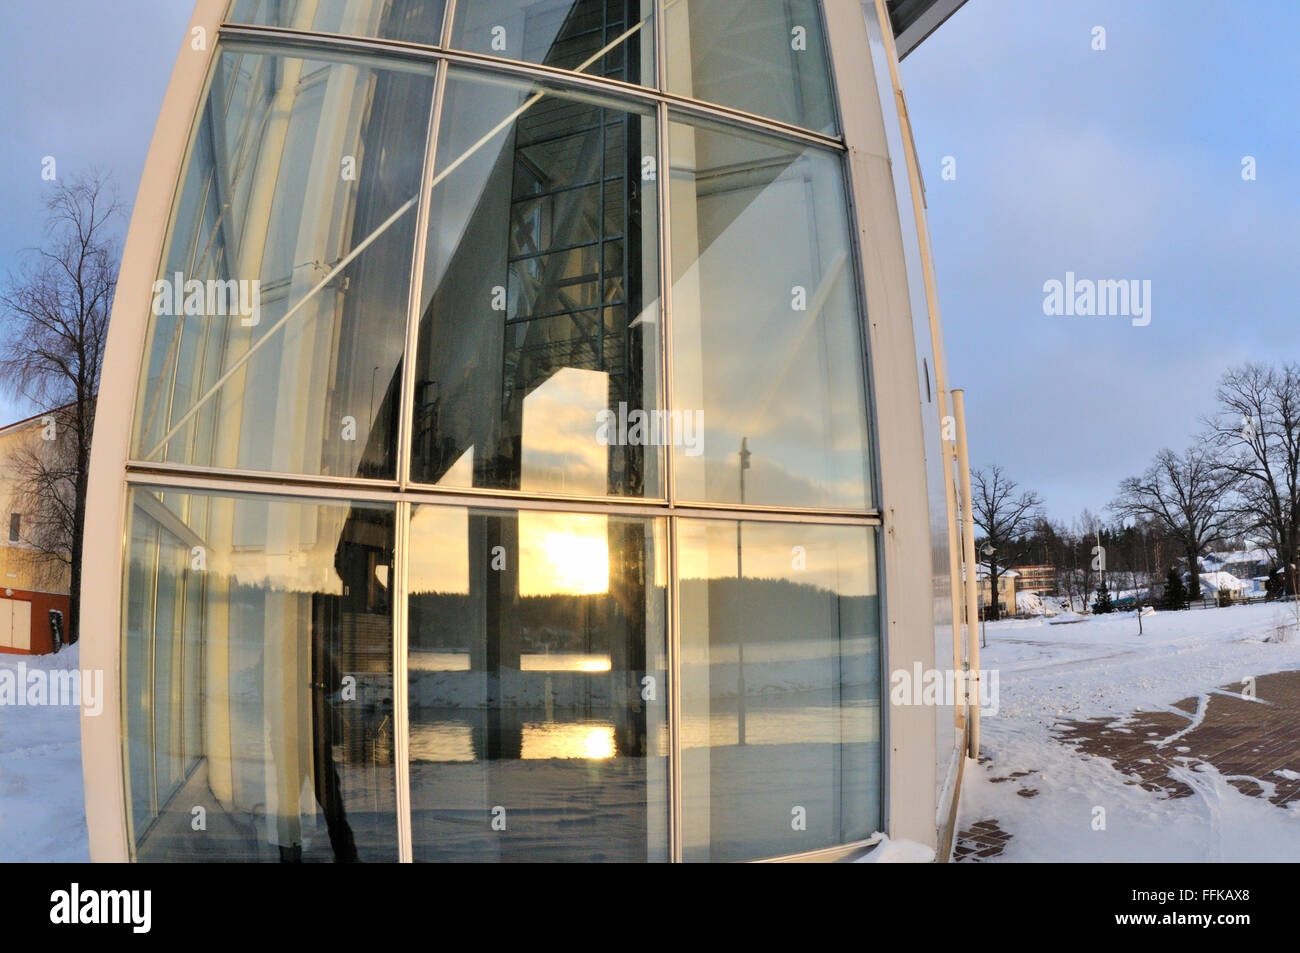 Reflection of a bridge in its elevator tower, Puumala, Finland Stock Photo